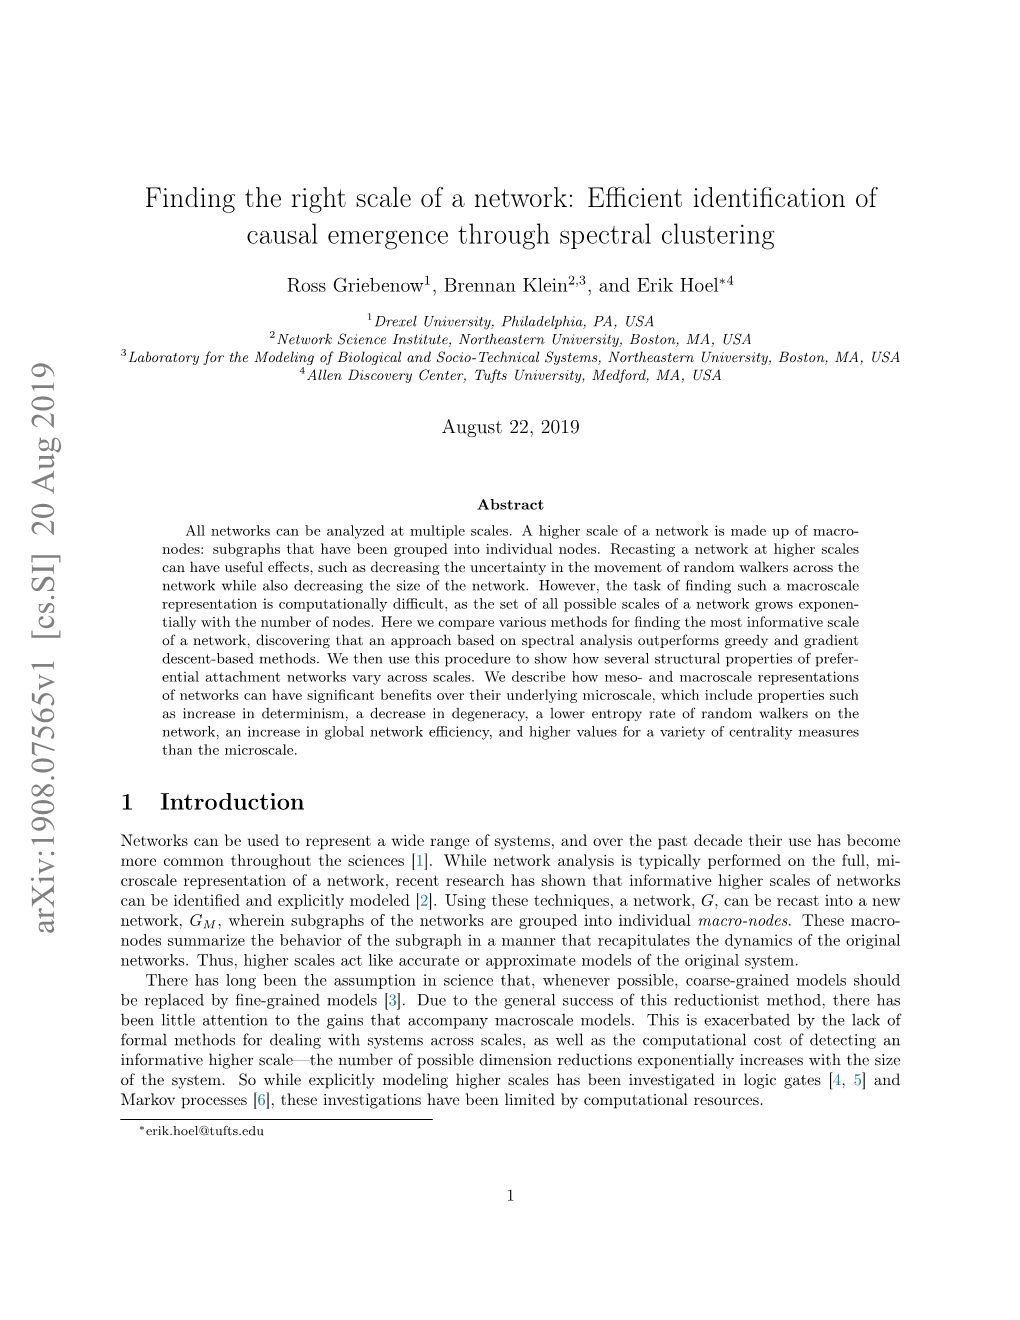 Arxiv:1908.07565V1 [Cs.SI] 20 Aug 2019 Nodes Summarize the Behavior of the Subgraph in a Manner That Recapitulates the Dynamics of the Original Networks